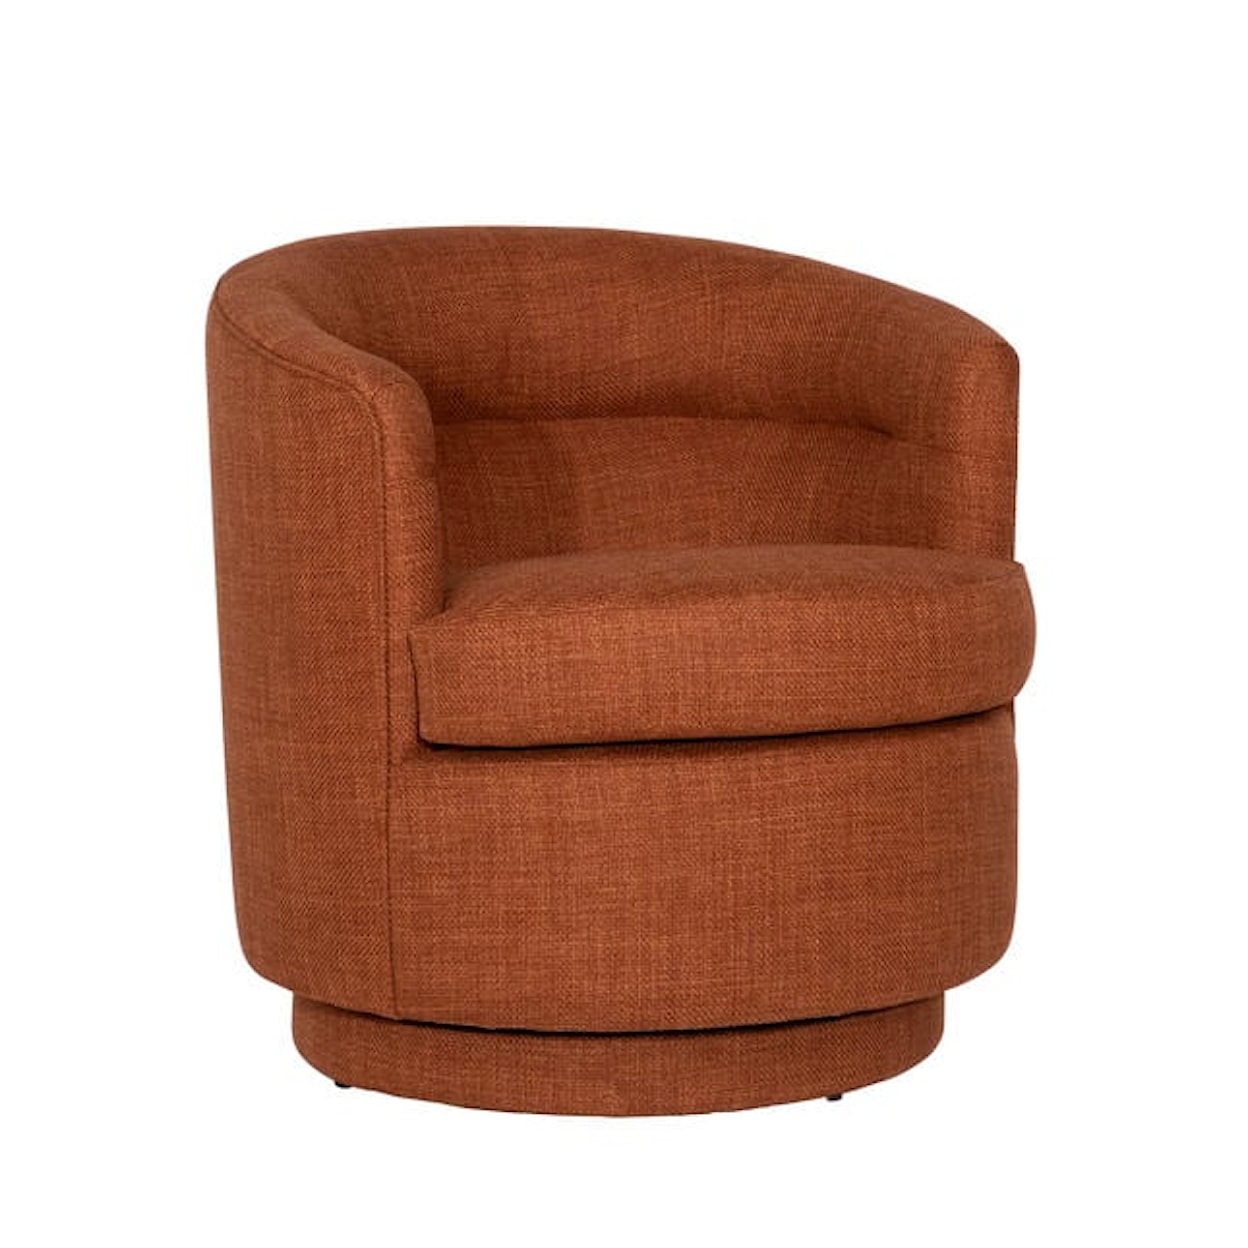 Dovetail Furniture Occasional Chairs Lauretta Swivel Chair